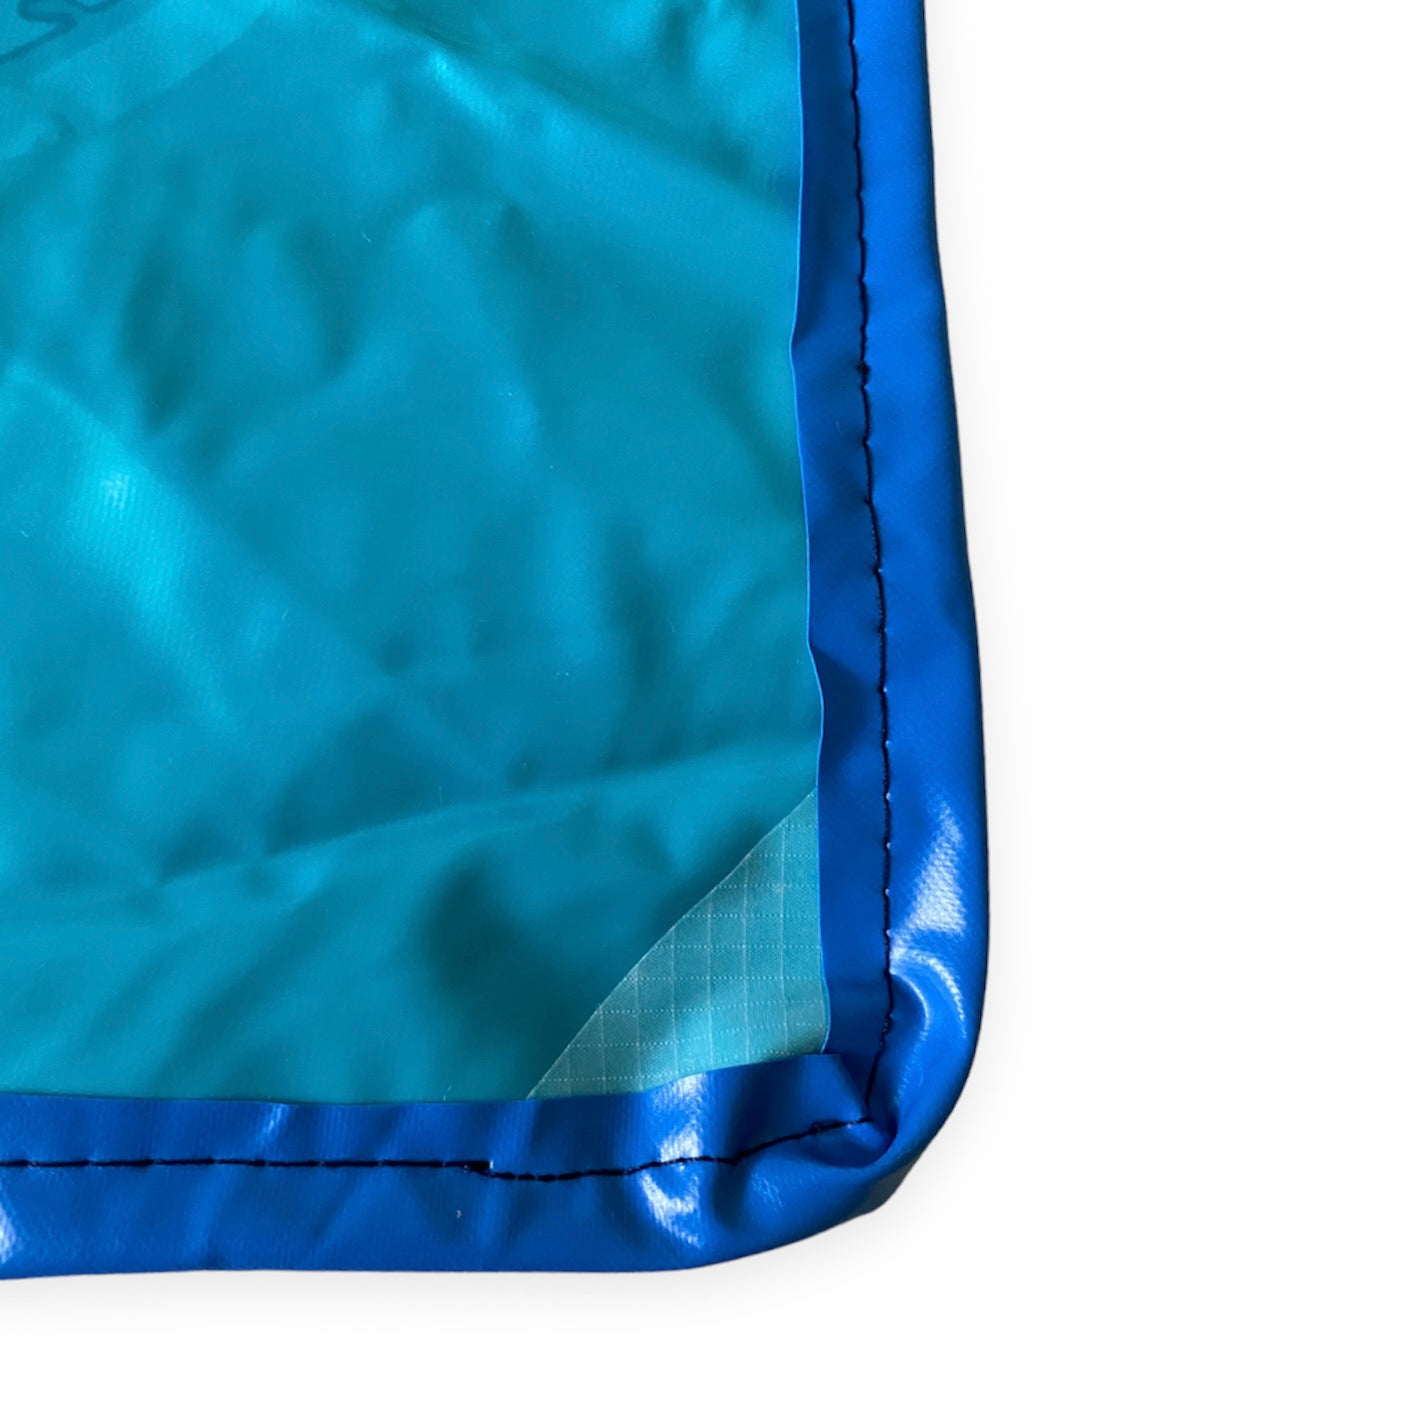 Wet bag from 100 % recycled pool inflatables, perfect for boating, swimming, beach or as book bag. Water resistant.  Showing reinforced corners